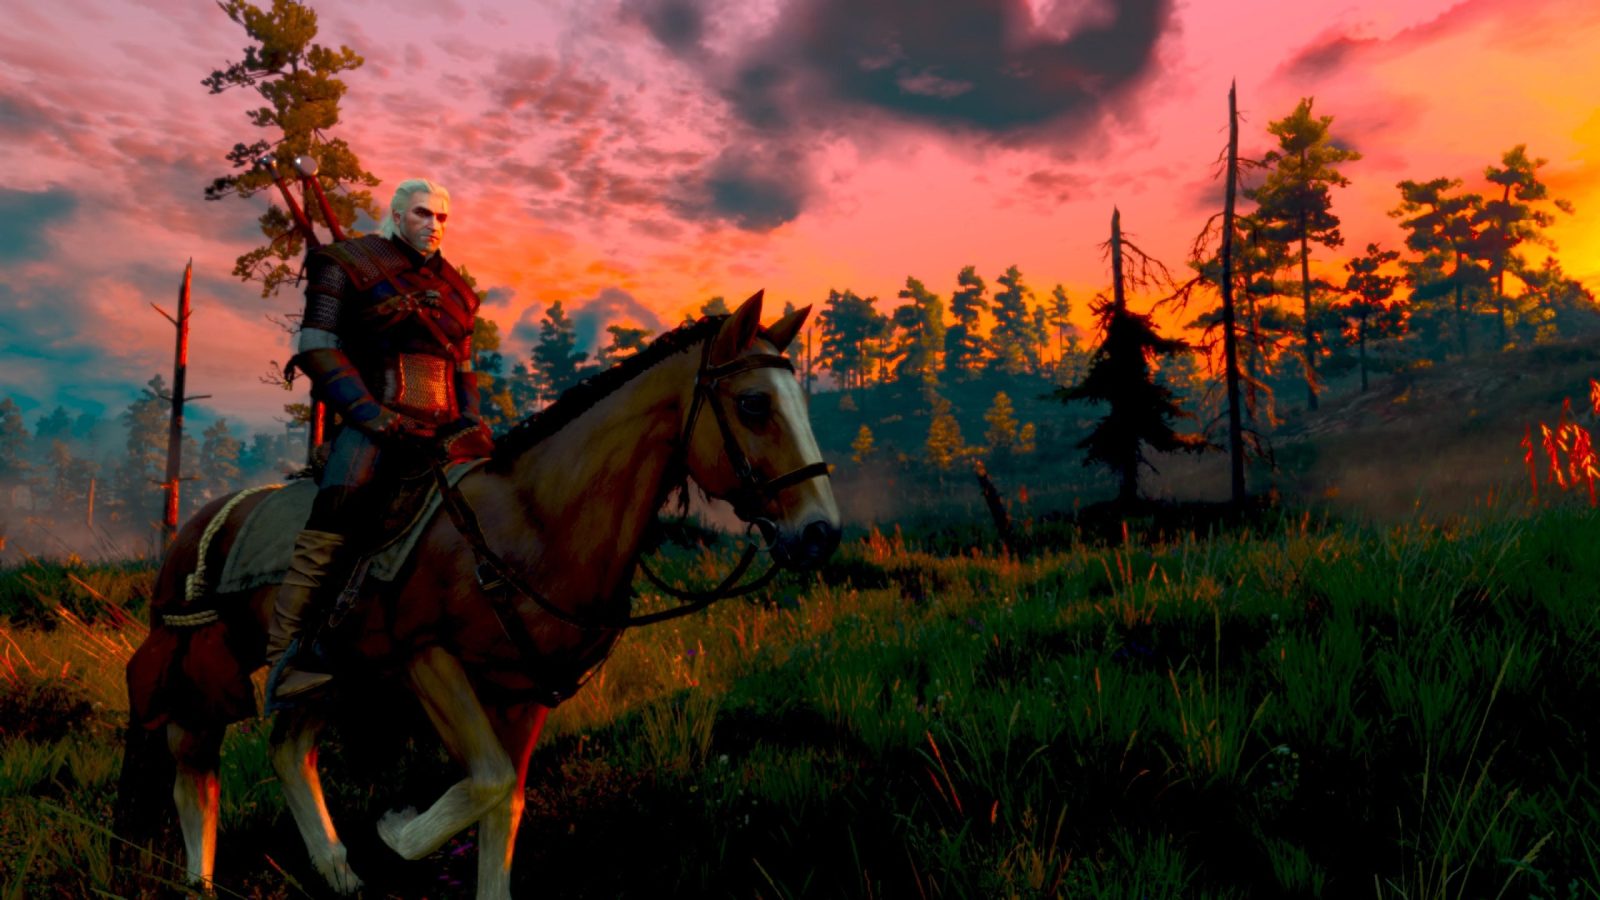 Review, The Witcher 3: Wild Hunt – Next-Gen Edition on Series X